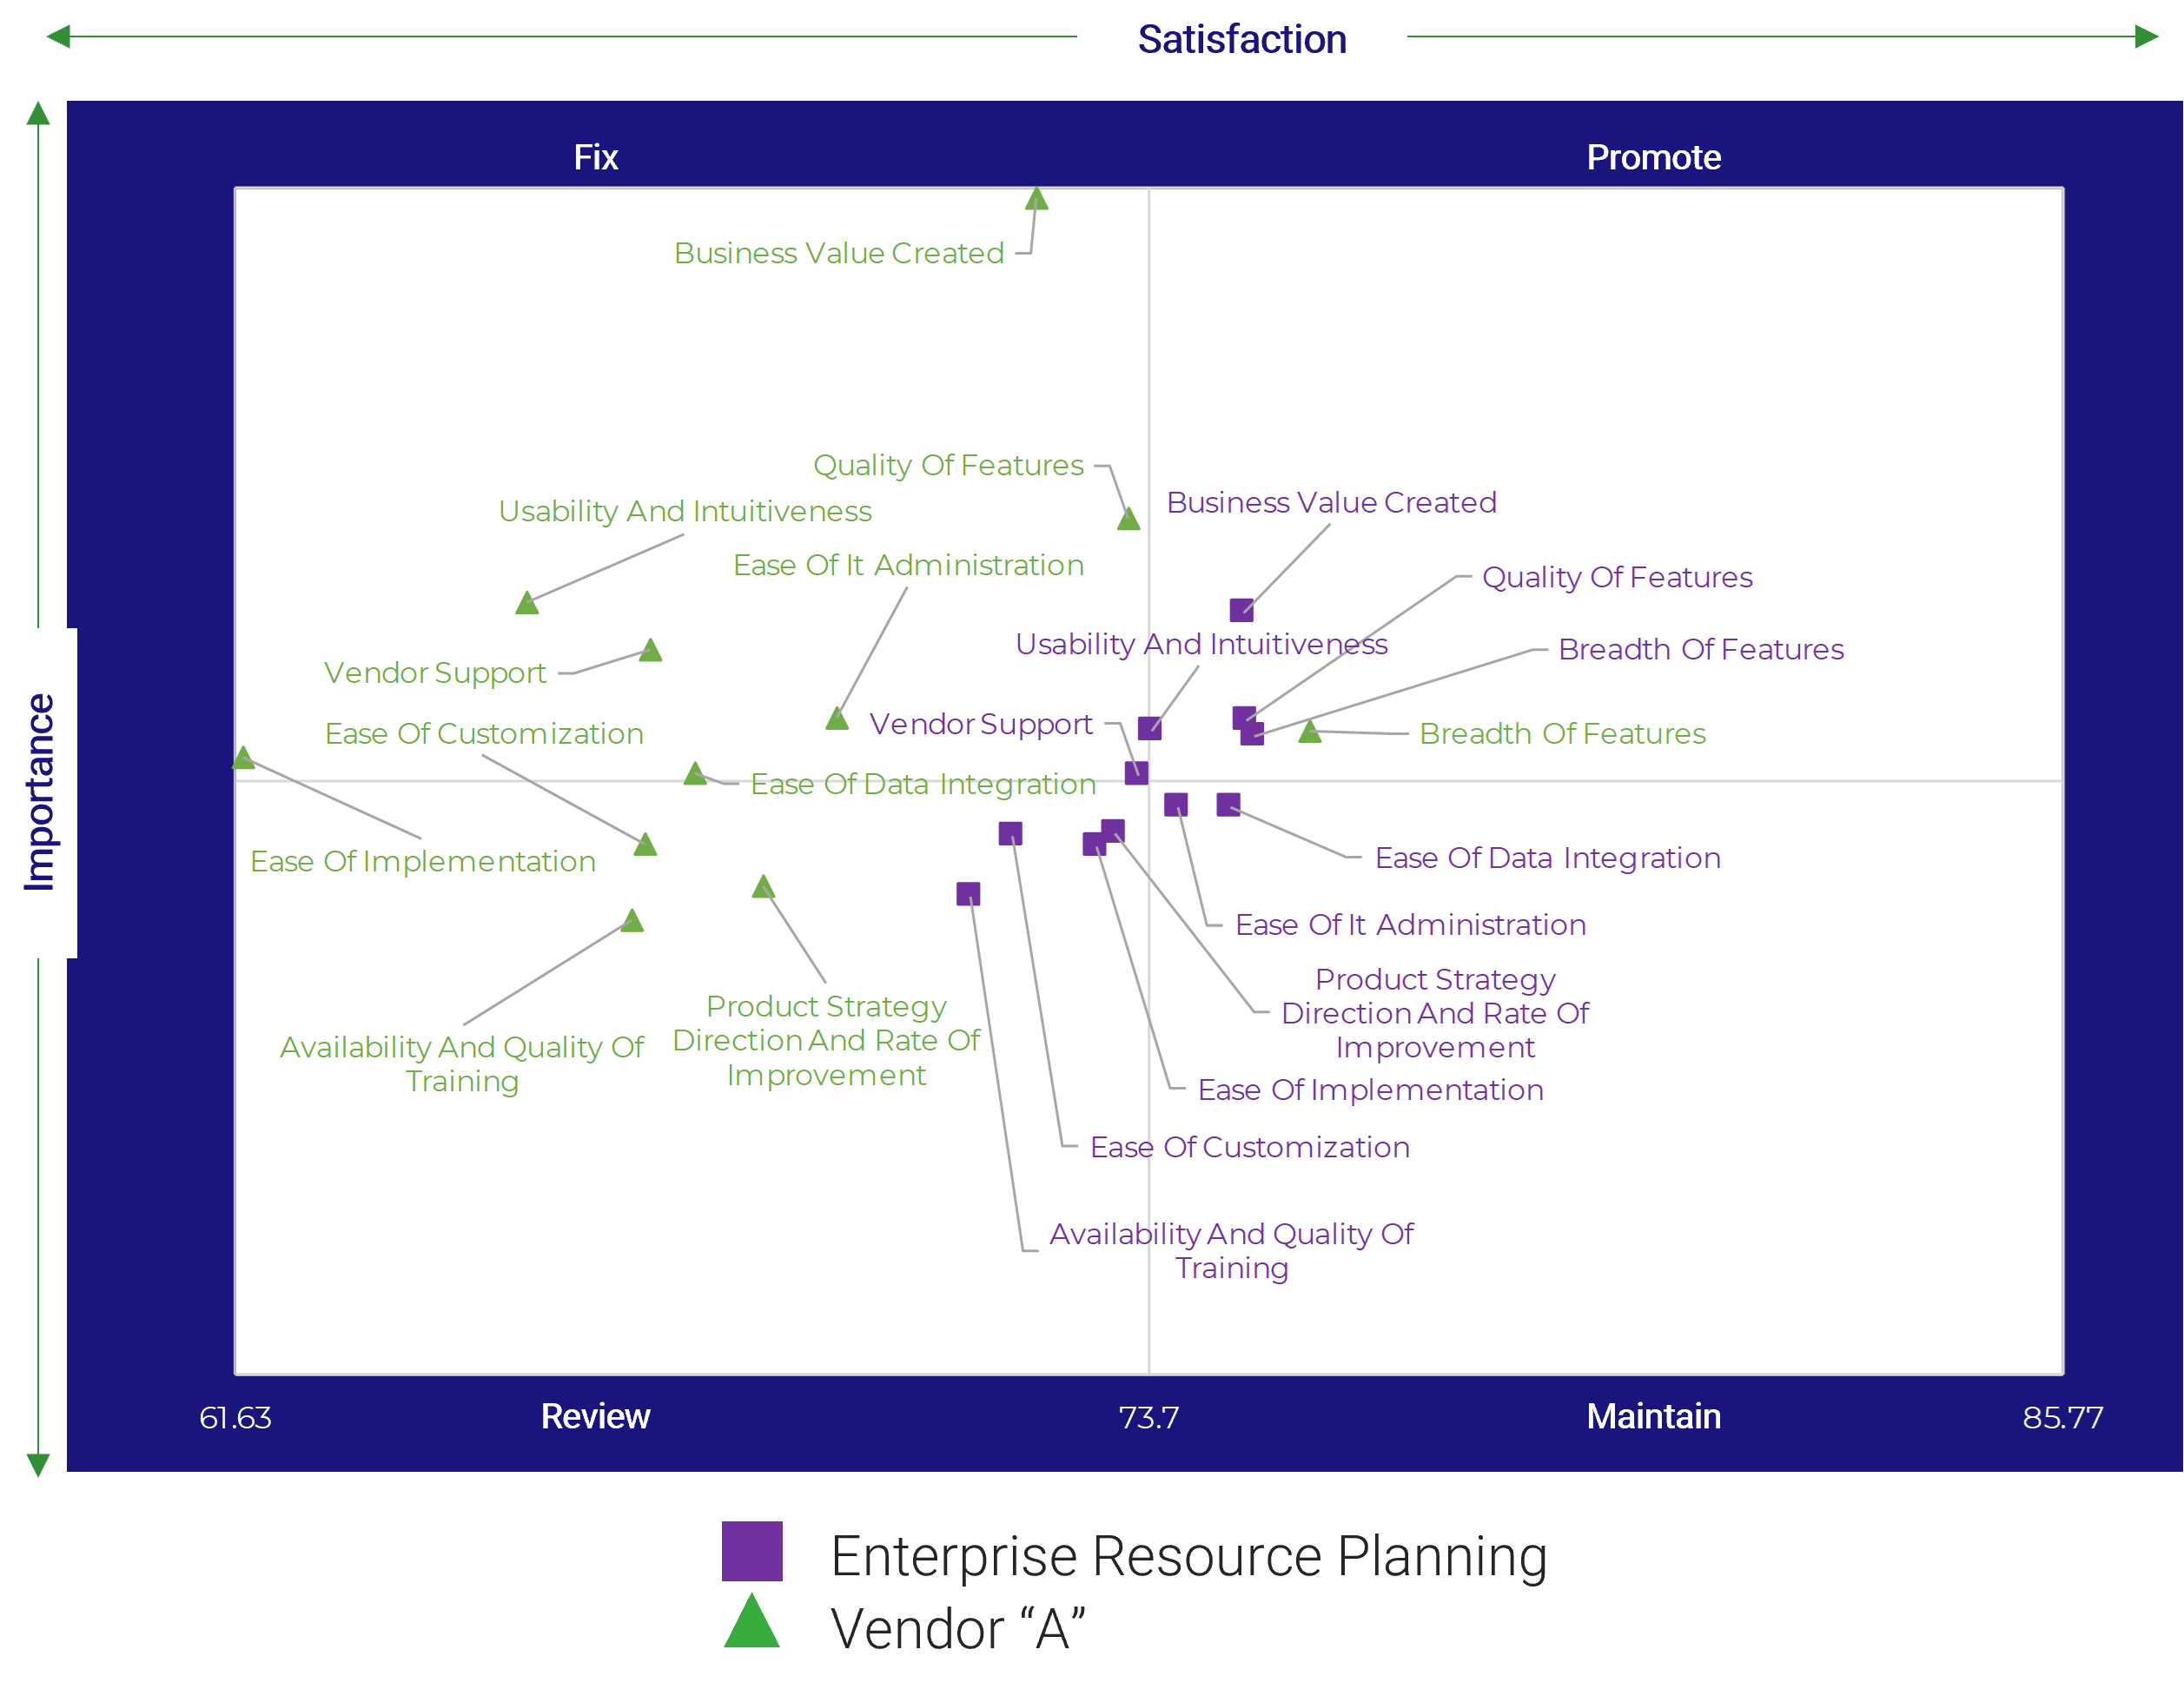 Importance vs. Satisfaction map for Capabilities with examples mapped onto it using a legend, purple squares are 'Enterprise Resource Planning' and green triangles are 'Vendor A'.